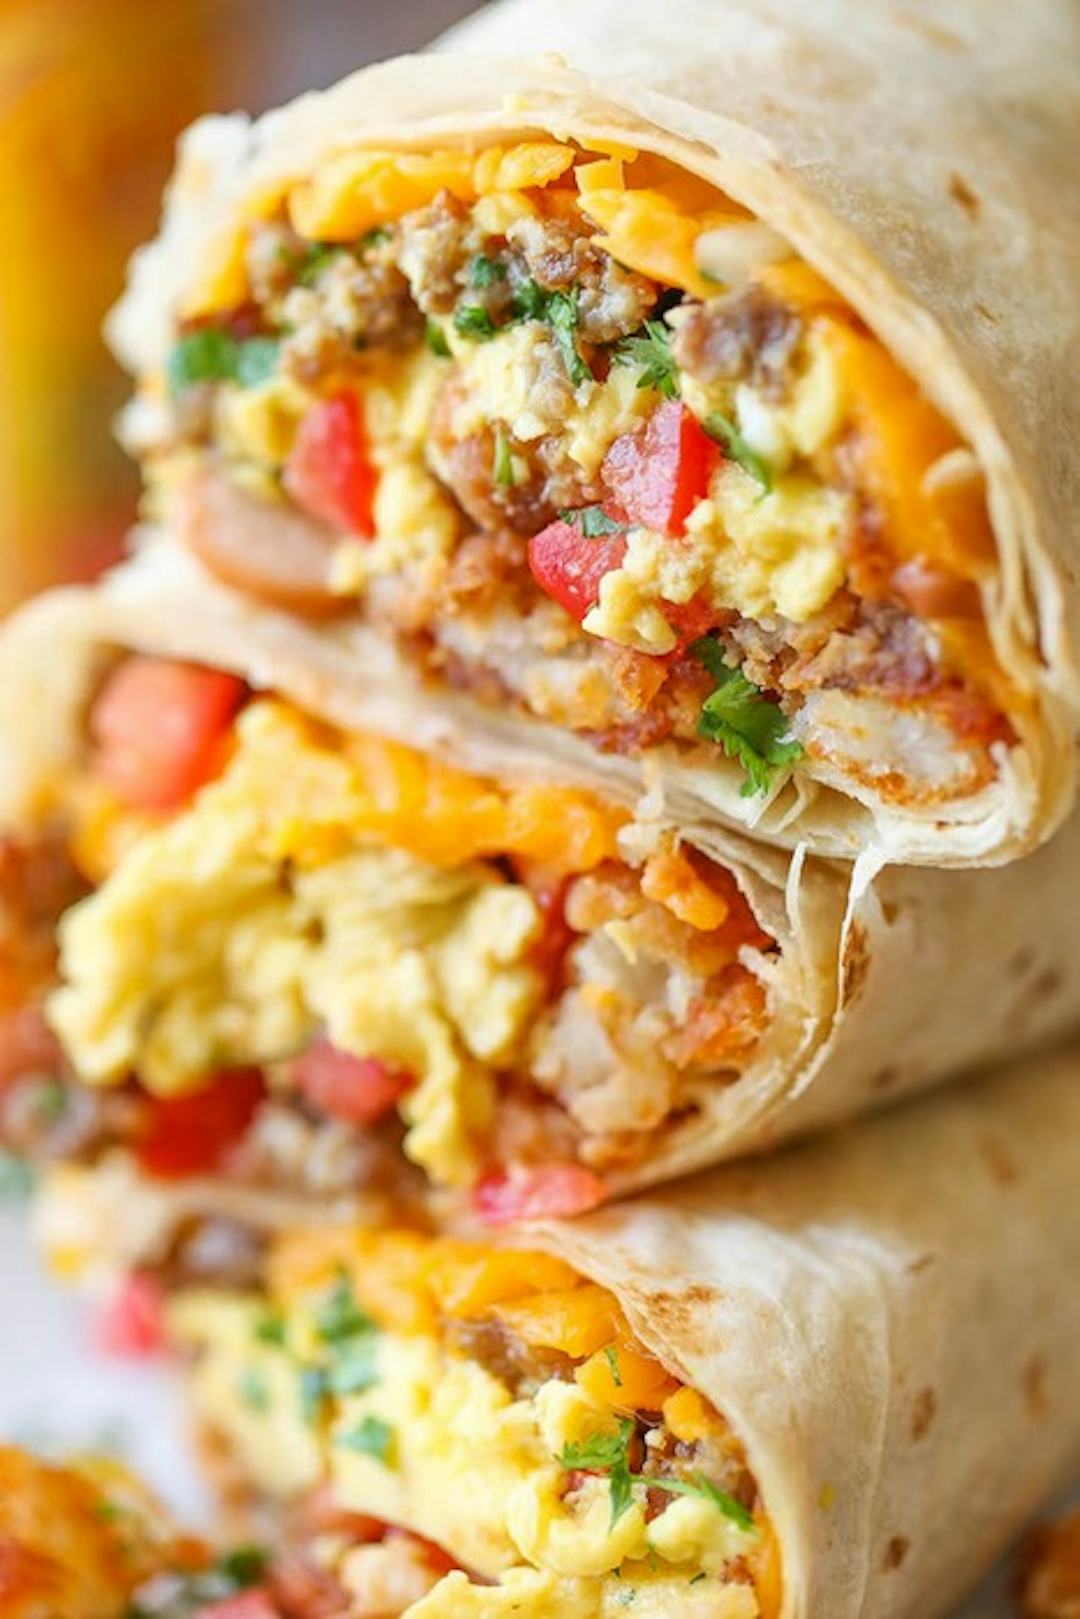 15 Breakfasts To Make The Night Before That'll Make It Easier To Get